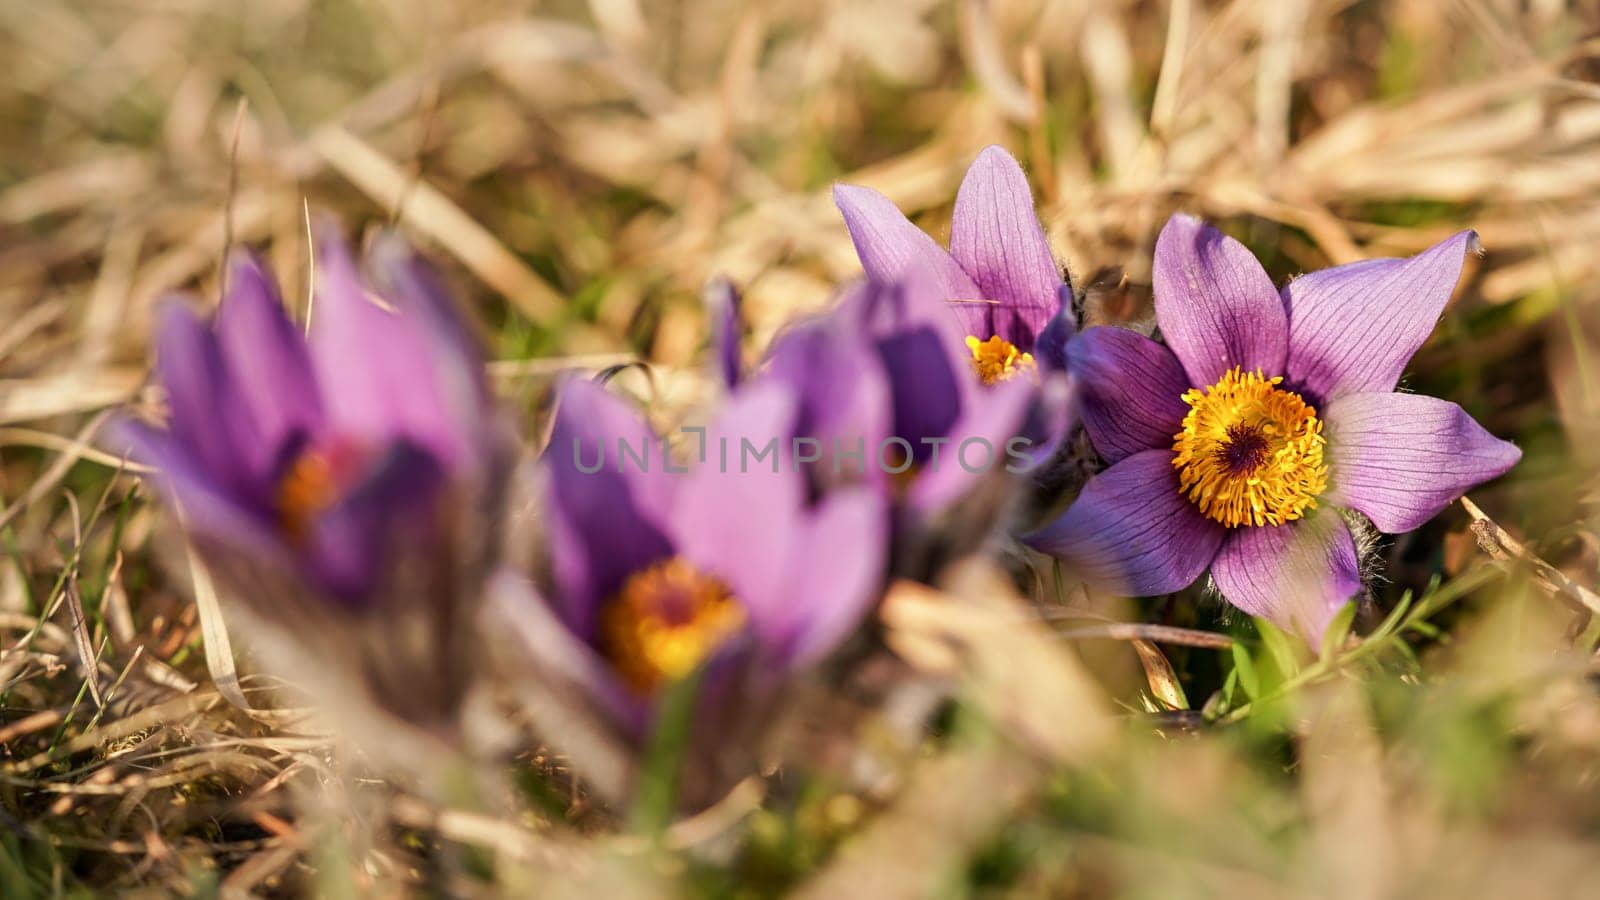 Purple greater pasque flower - Pulsatilla grandis - growing in dry grass, close up detail